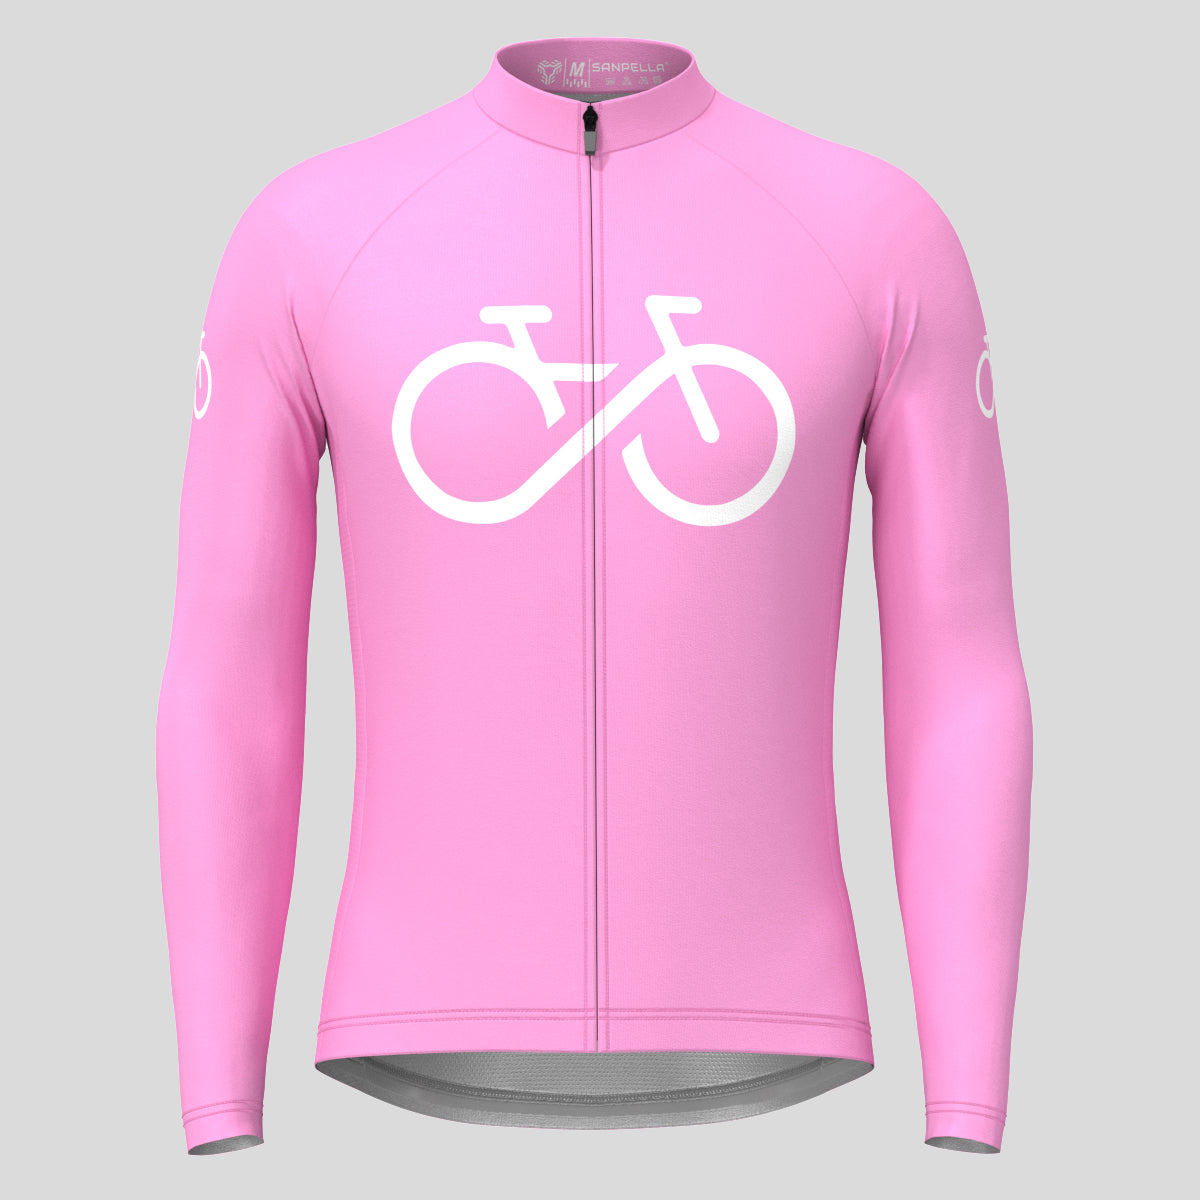 Bike Forever Men's LS Cycling Jersey - Neo Pink